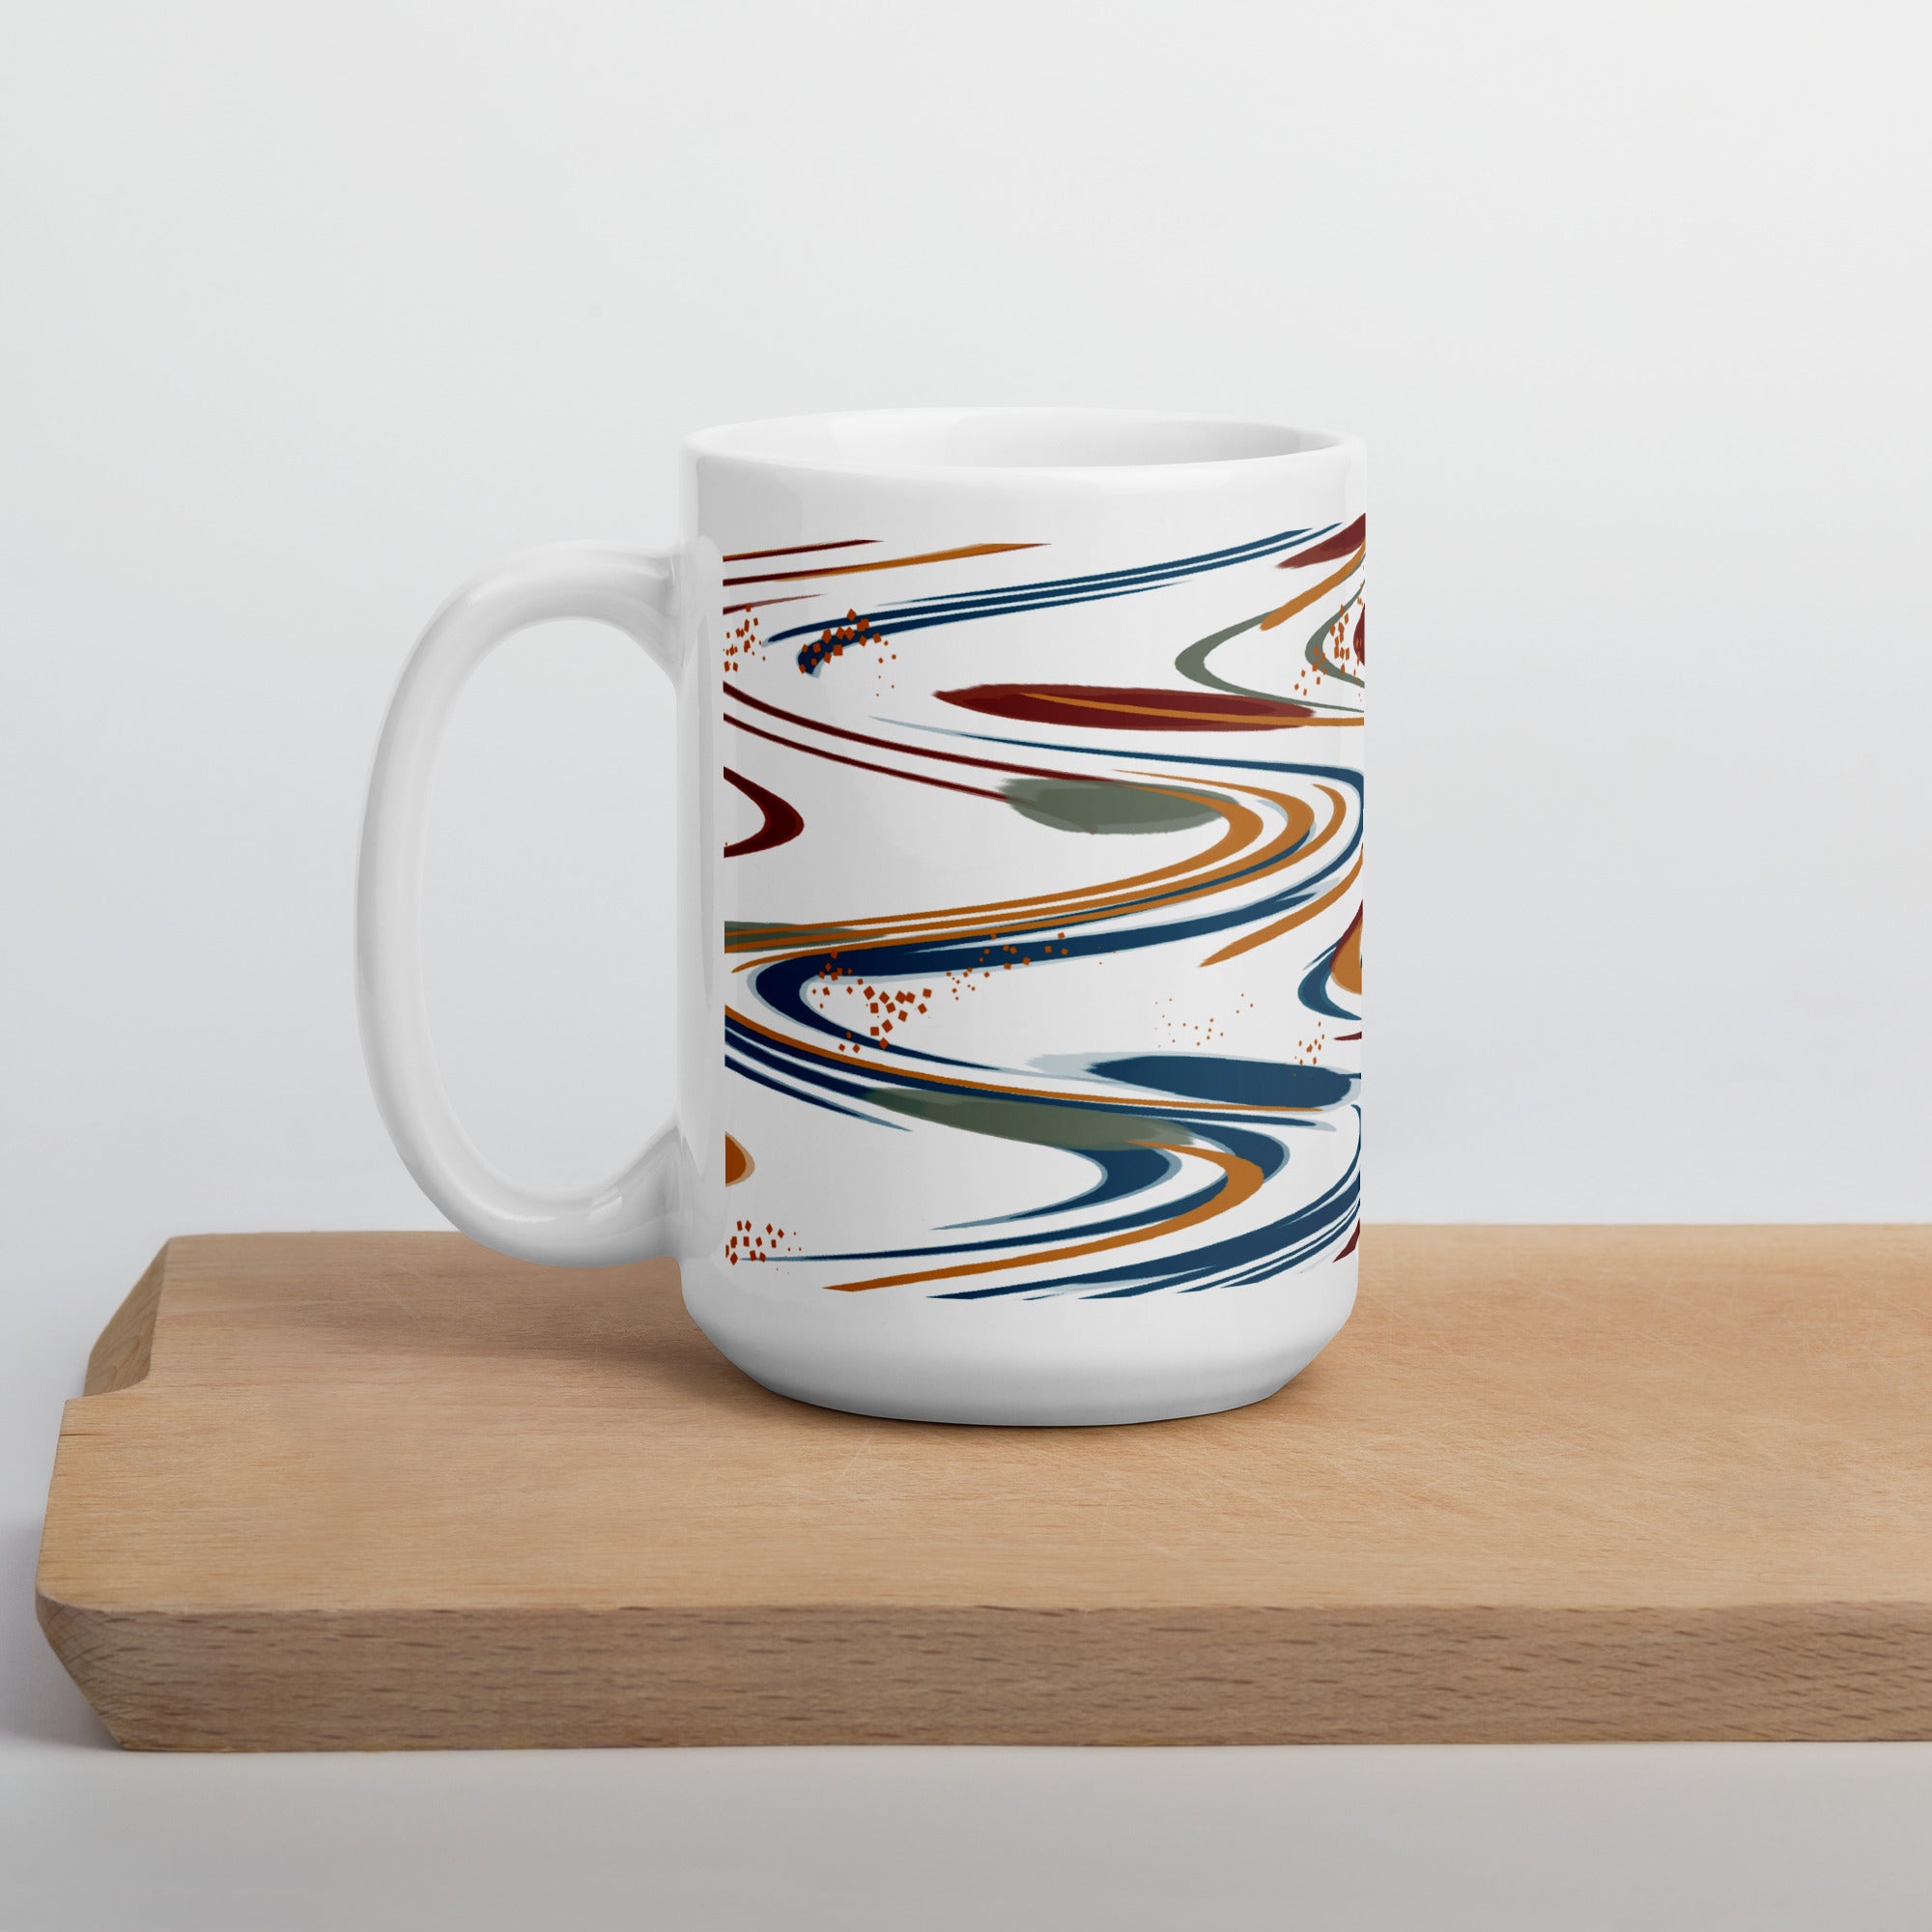 Spaced Out Mug in Blue, Maroon, Orange and Olive Green